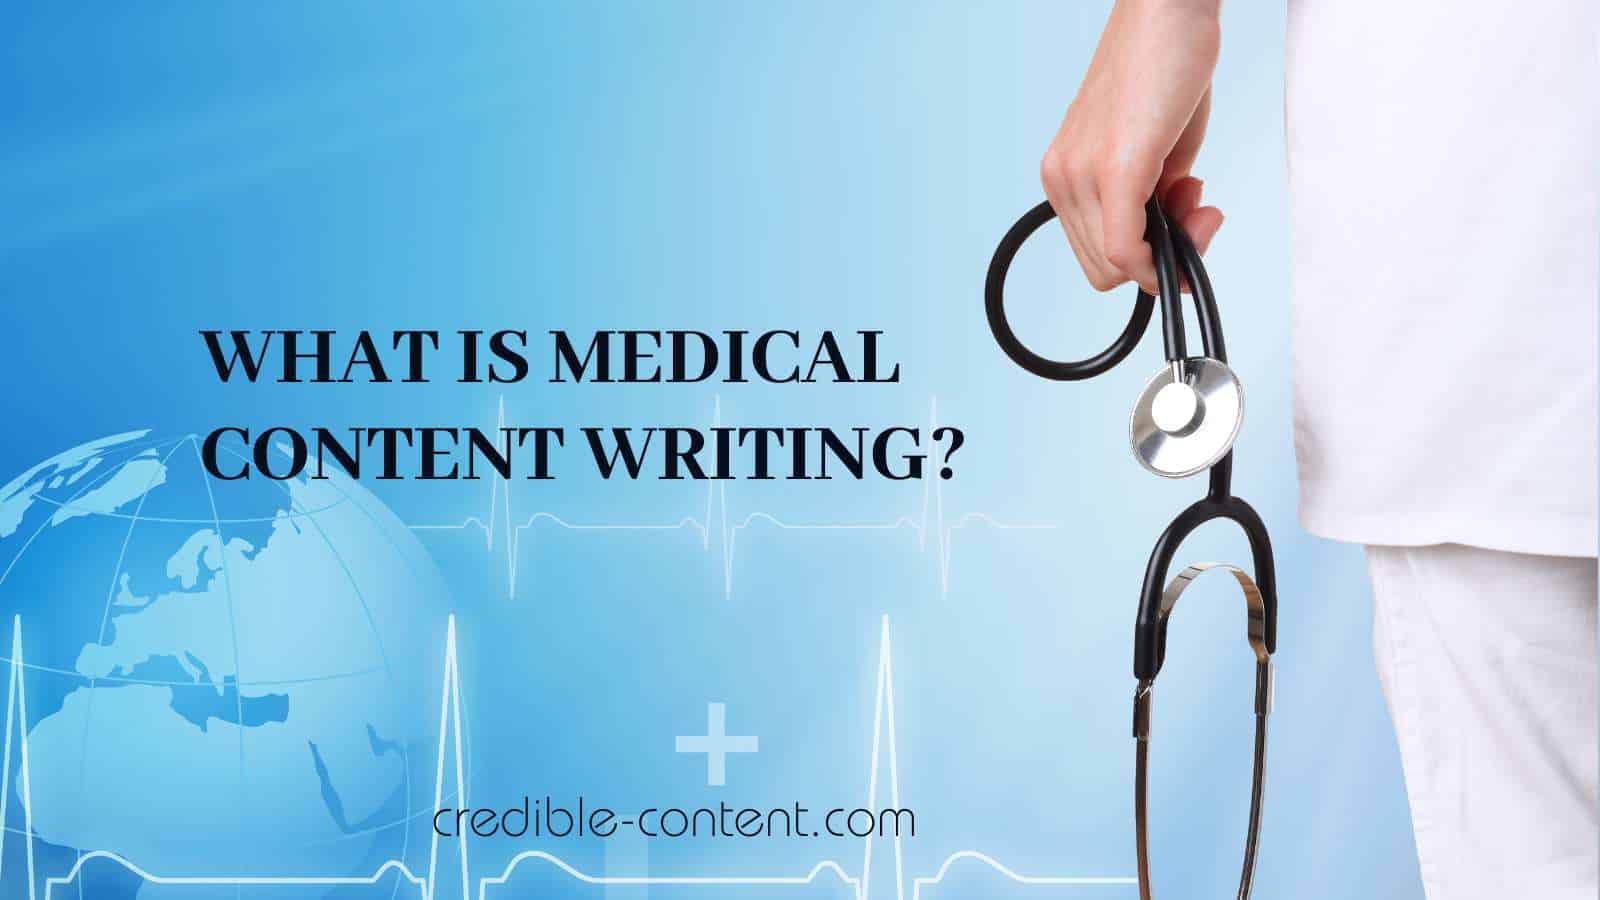 What is medical content writing